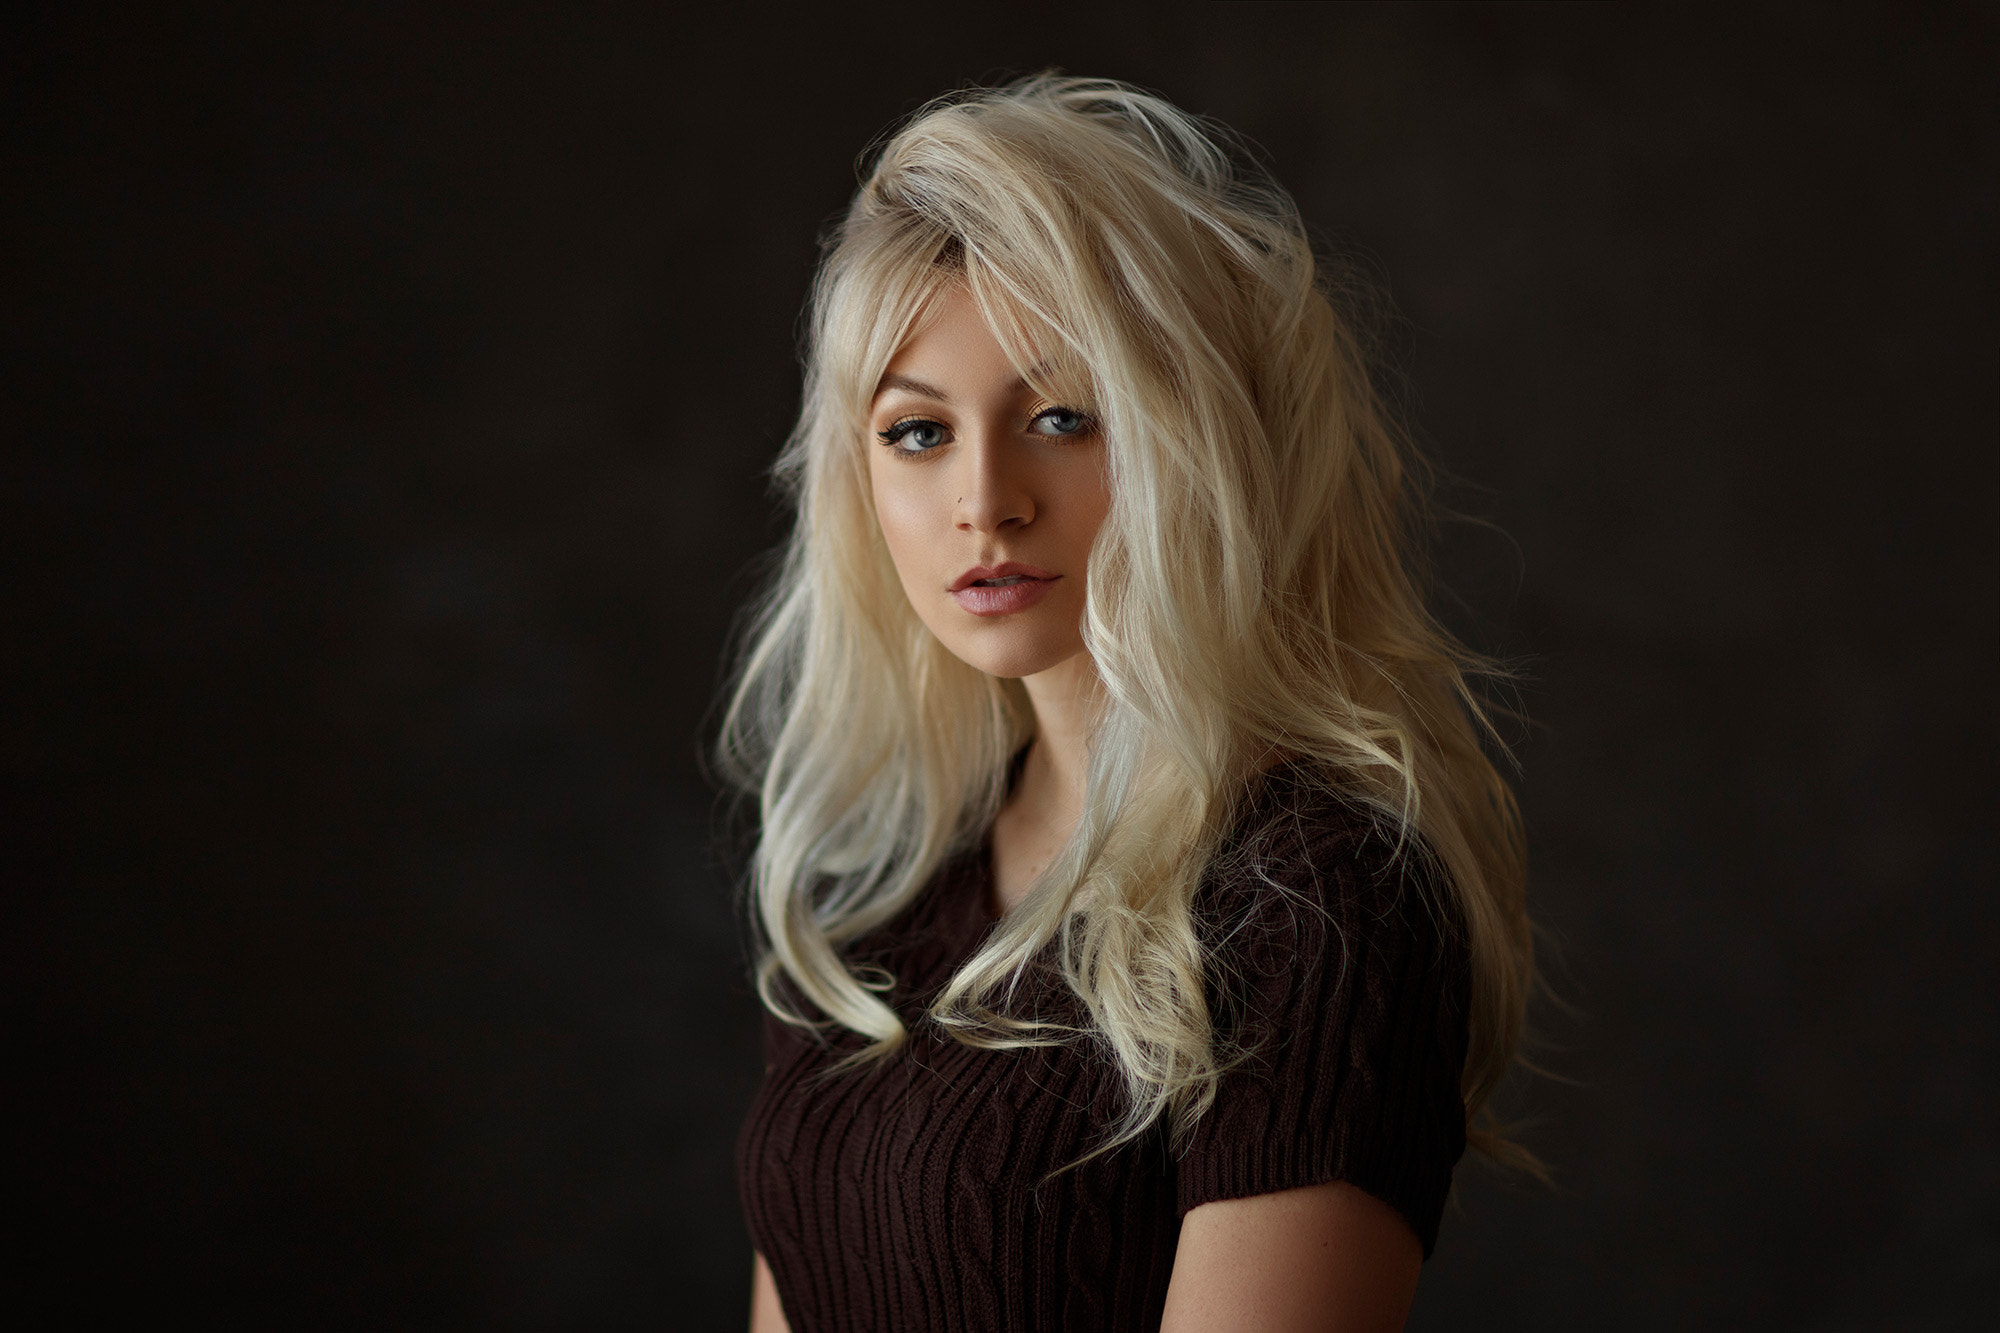 Free photo Light-haired girl in a brown sweater